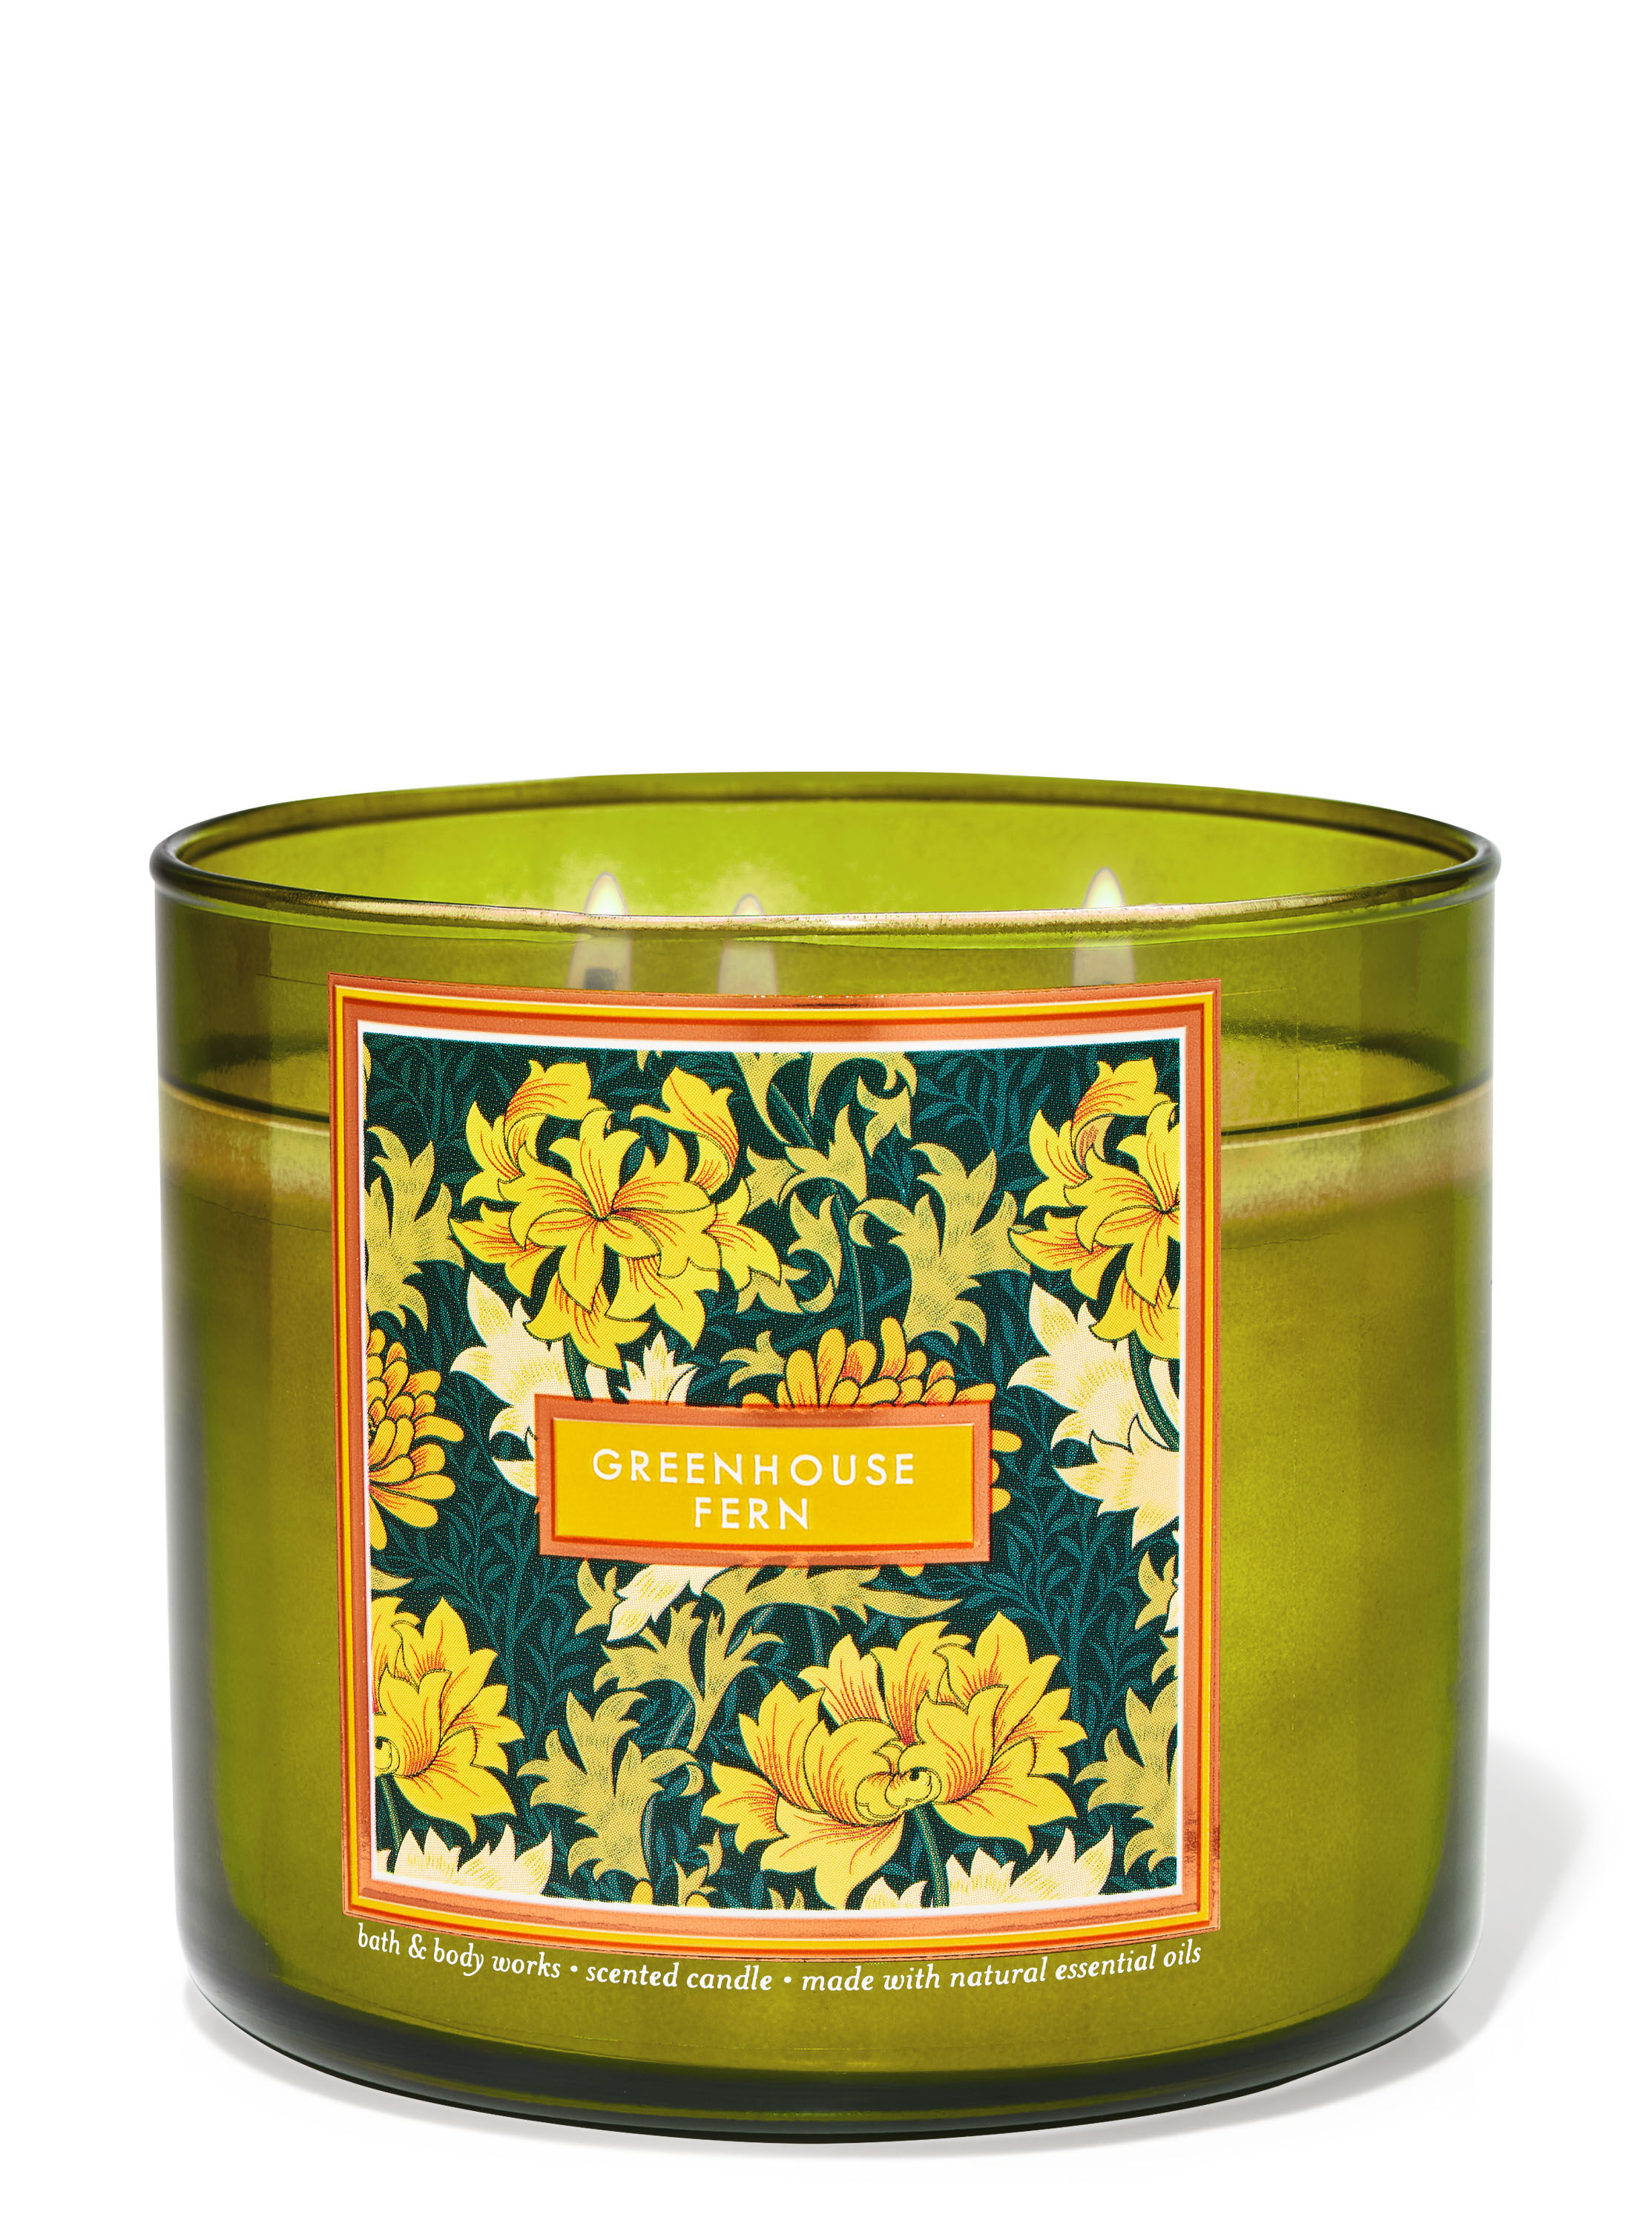 Greenhouse Fern 3-Wick Candle